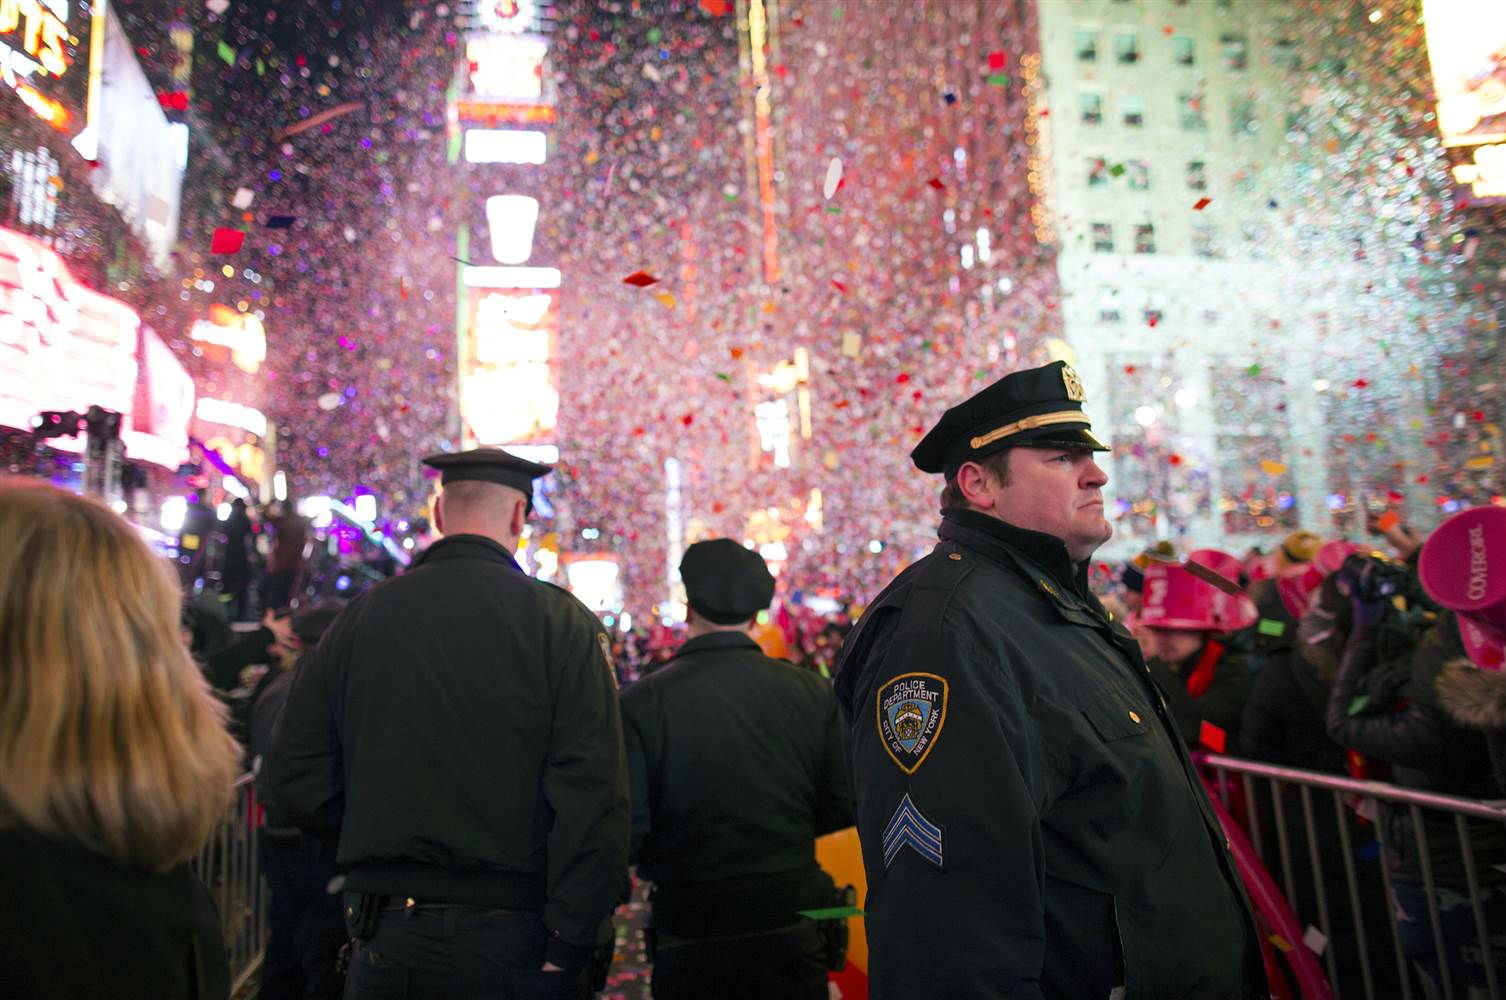 New York's mayor has said Times Square will be the safest place in the country